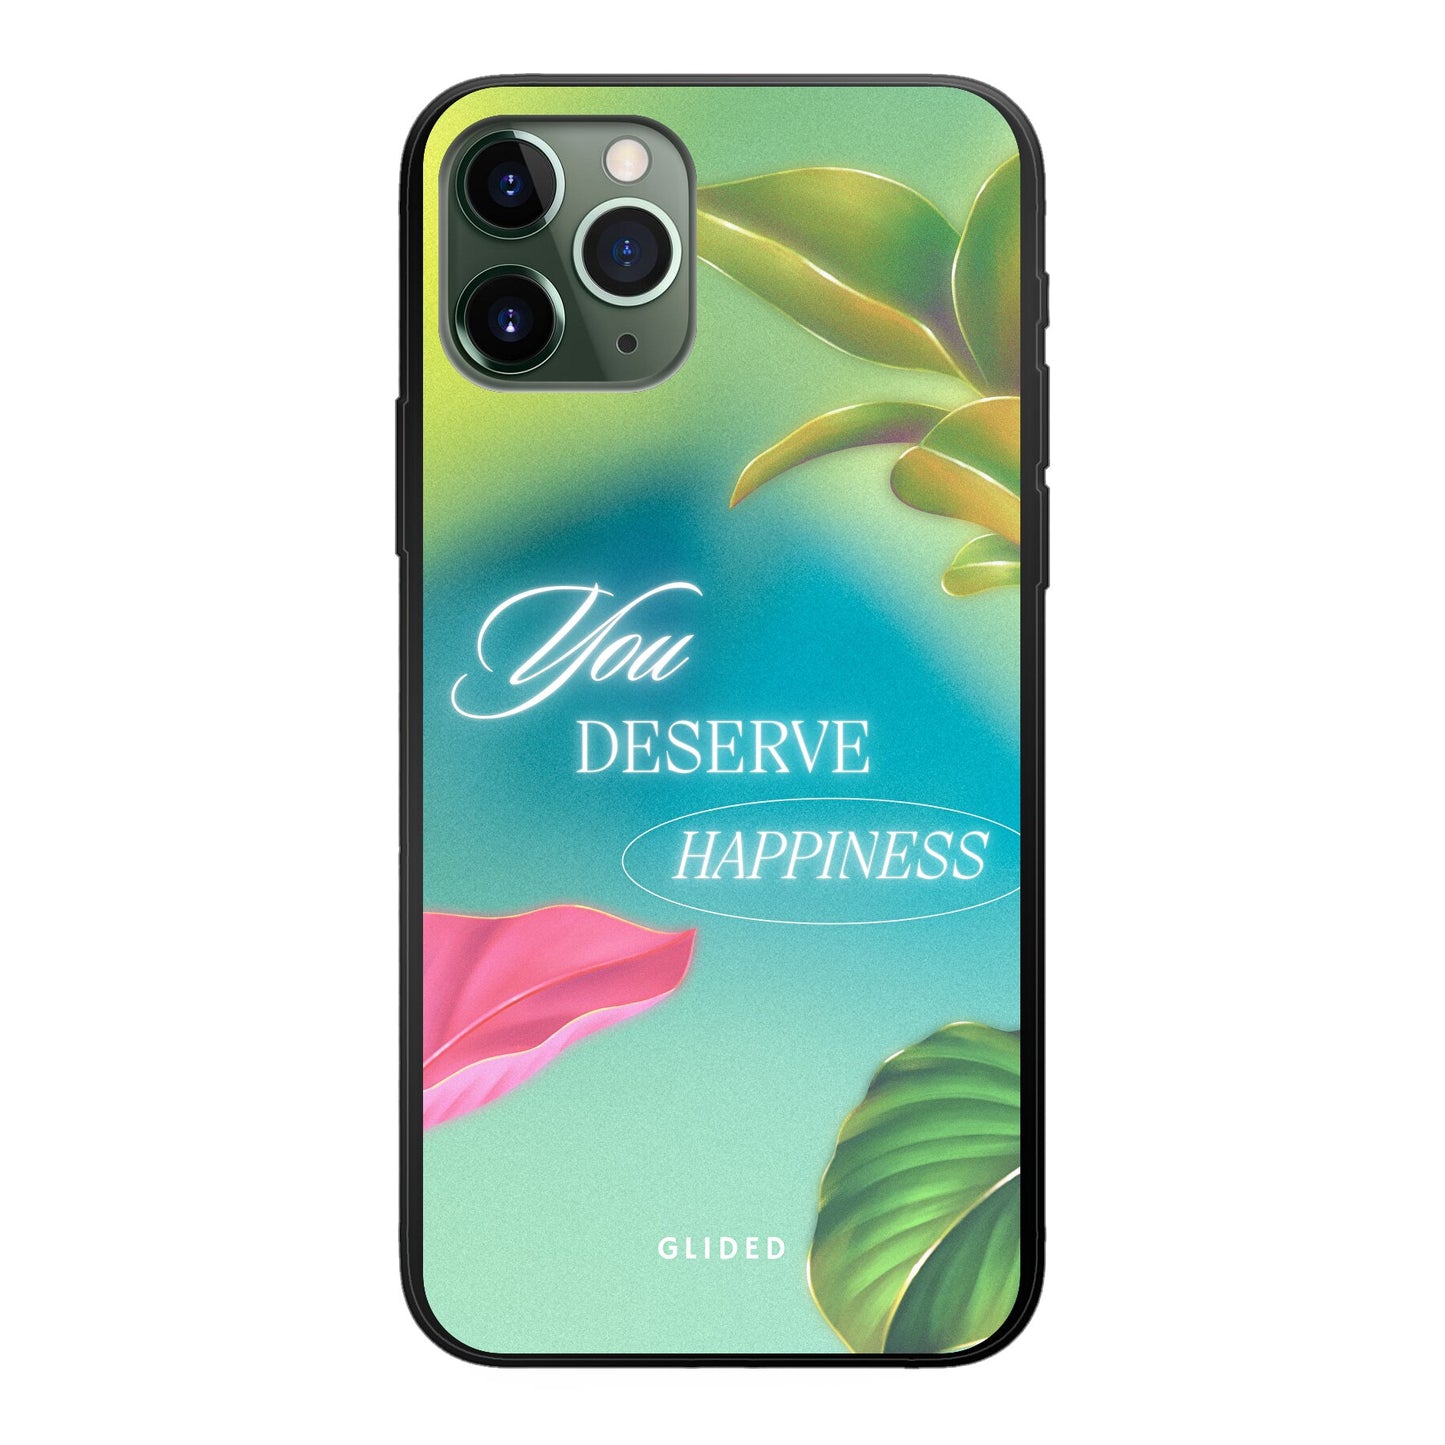 Happiness - iPhone 11 Pro - Soft case